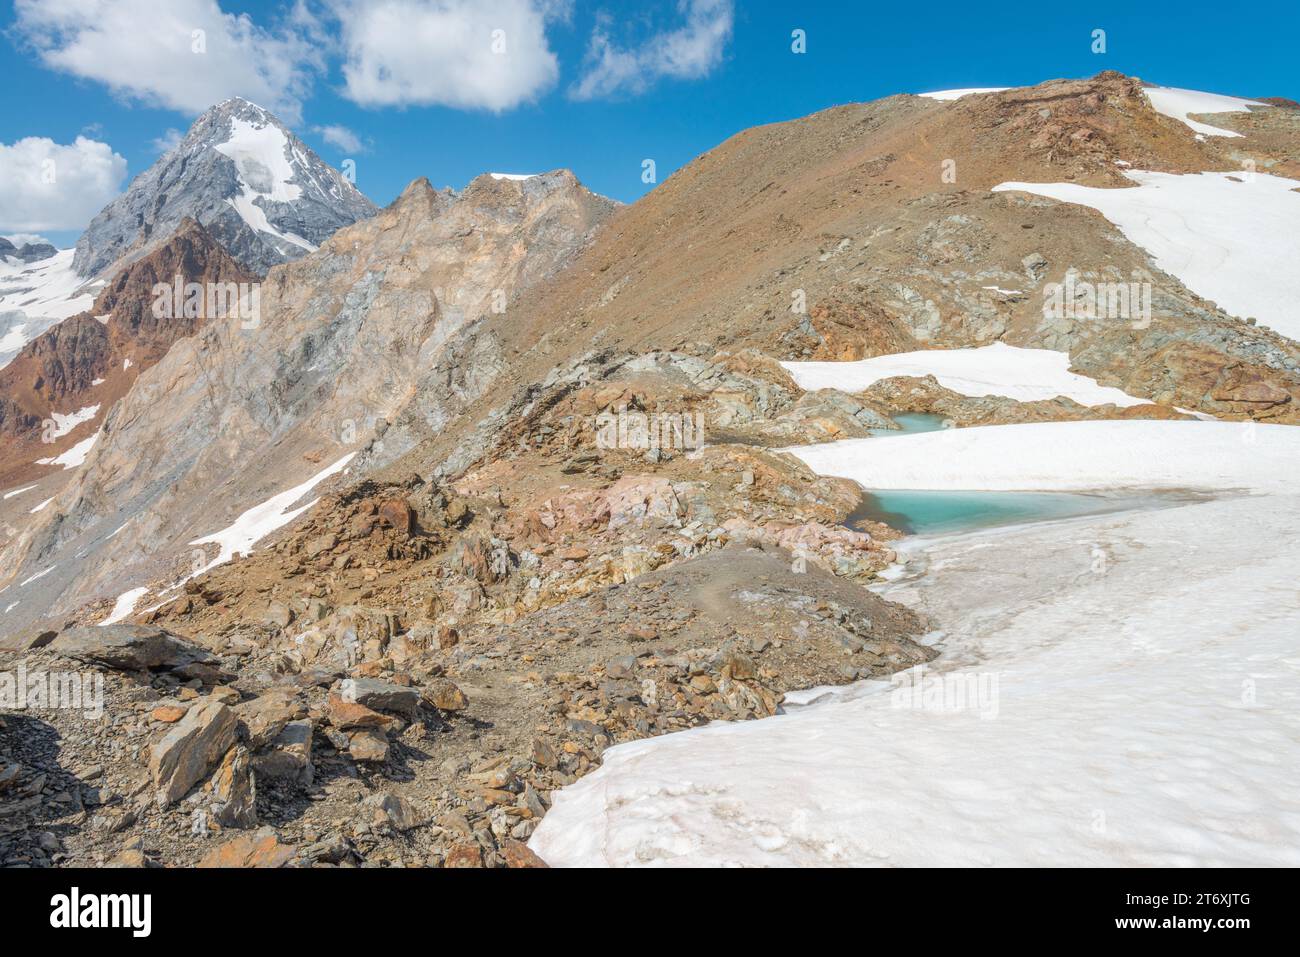 Hiking a dark mountain ridge, with small snowfield and meltwater tarn. Majestic prominent peak Konigspitze and glacier in the background Stock Photo